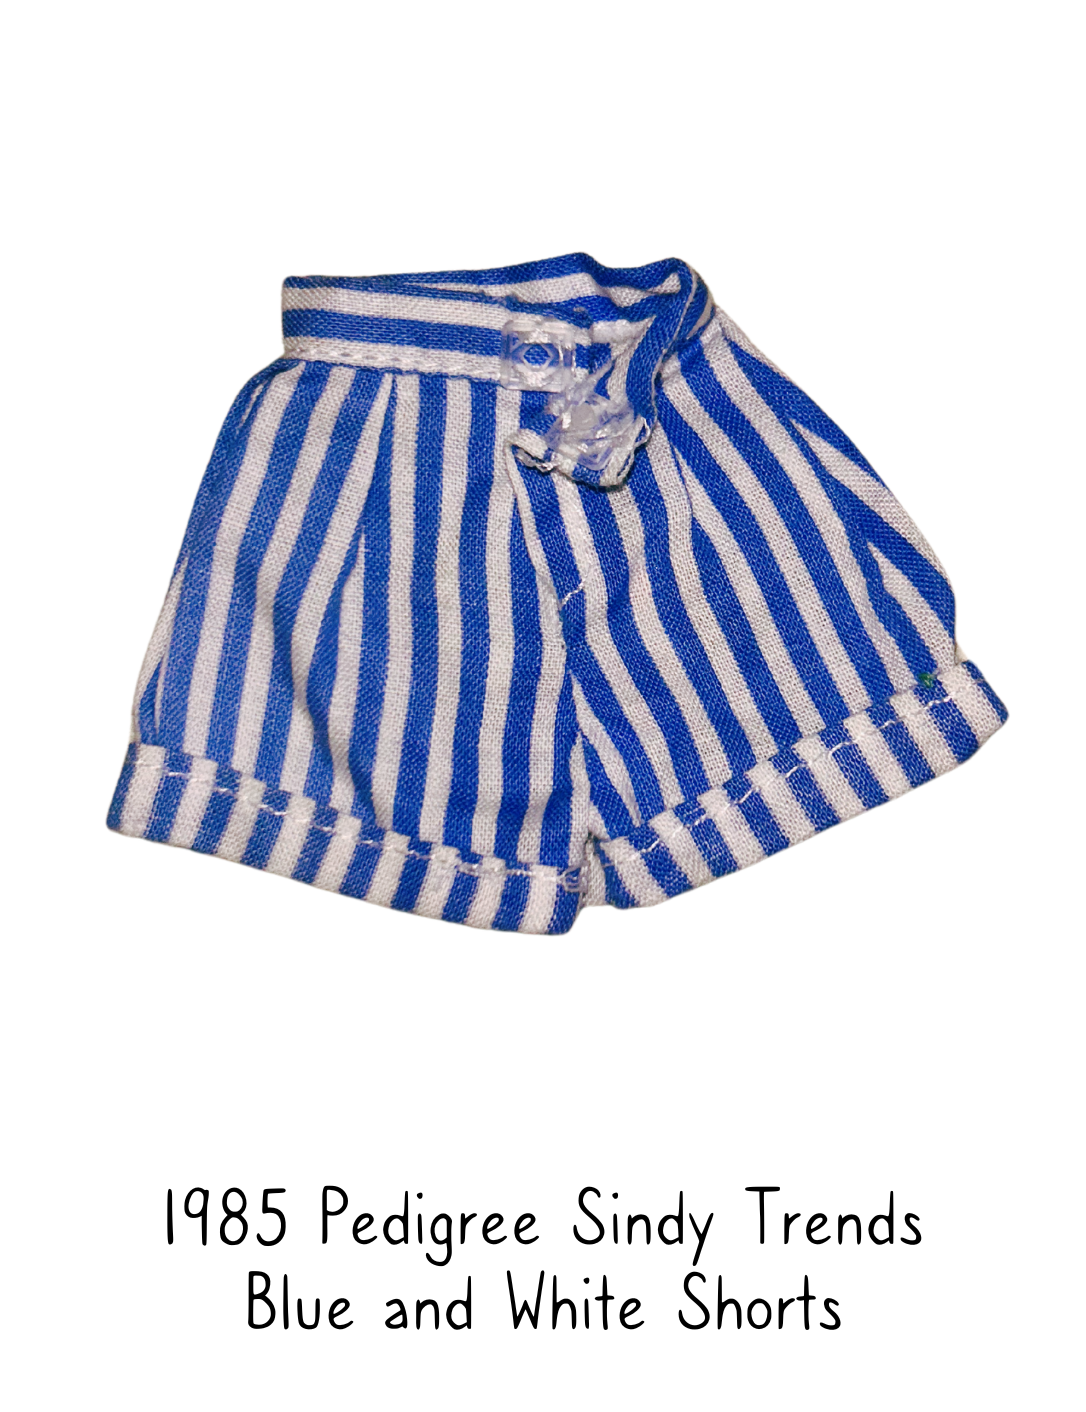 1985 Pedigree Sindy Fashion Doll Trends Blue and White Striped Shorts